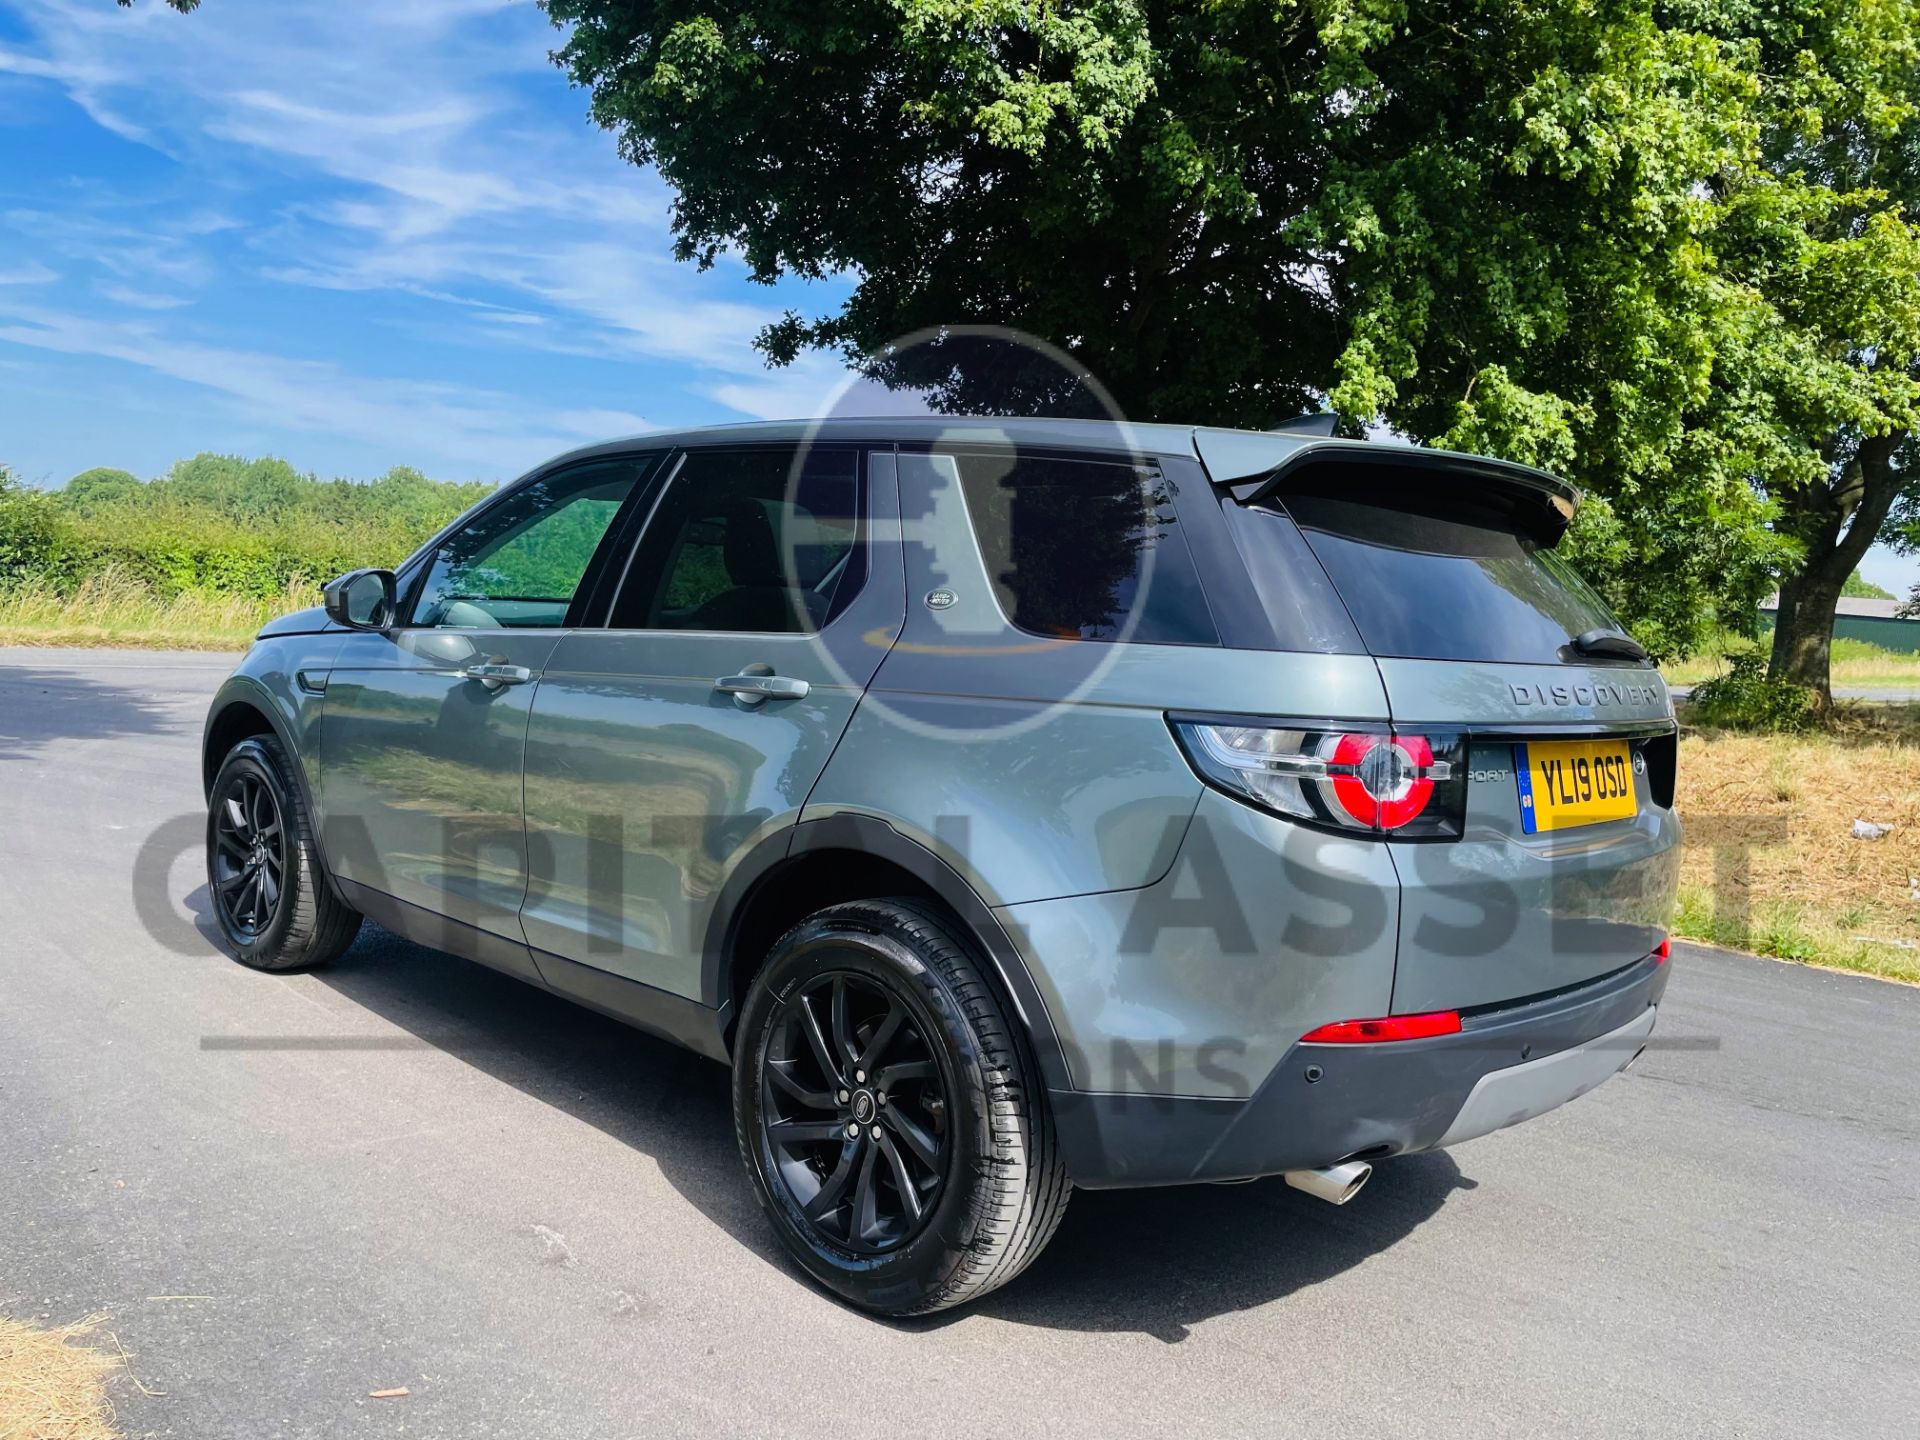 (On Sale) LAND ROVER DISCOVERY SPORT *SE TECH* SUV (2019 - EURO 6) 2.0 ED4 - STOP/START *HUGE SPEC* - Image 10 of 55